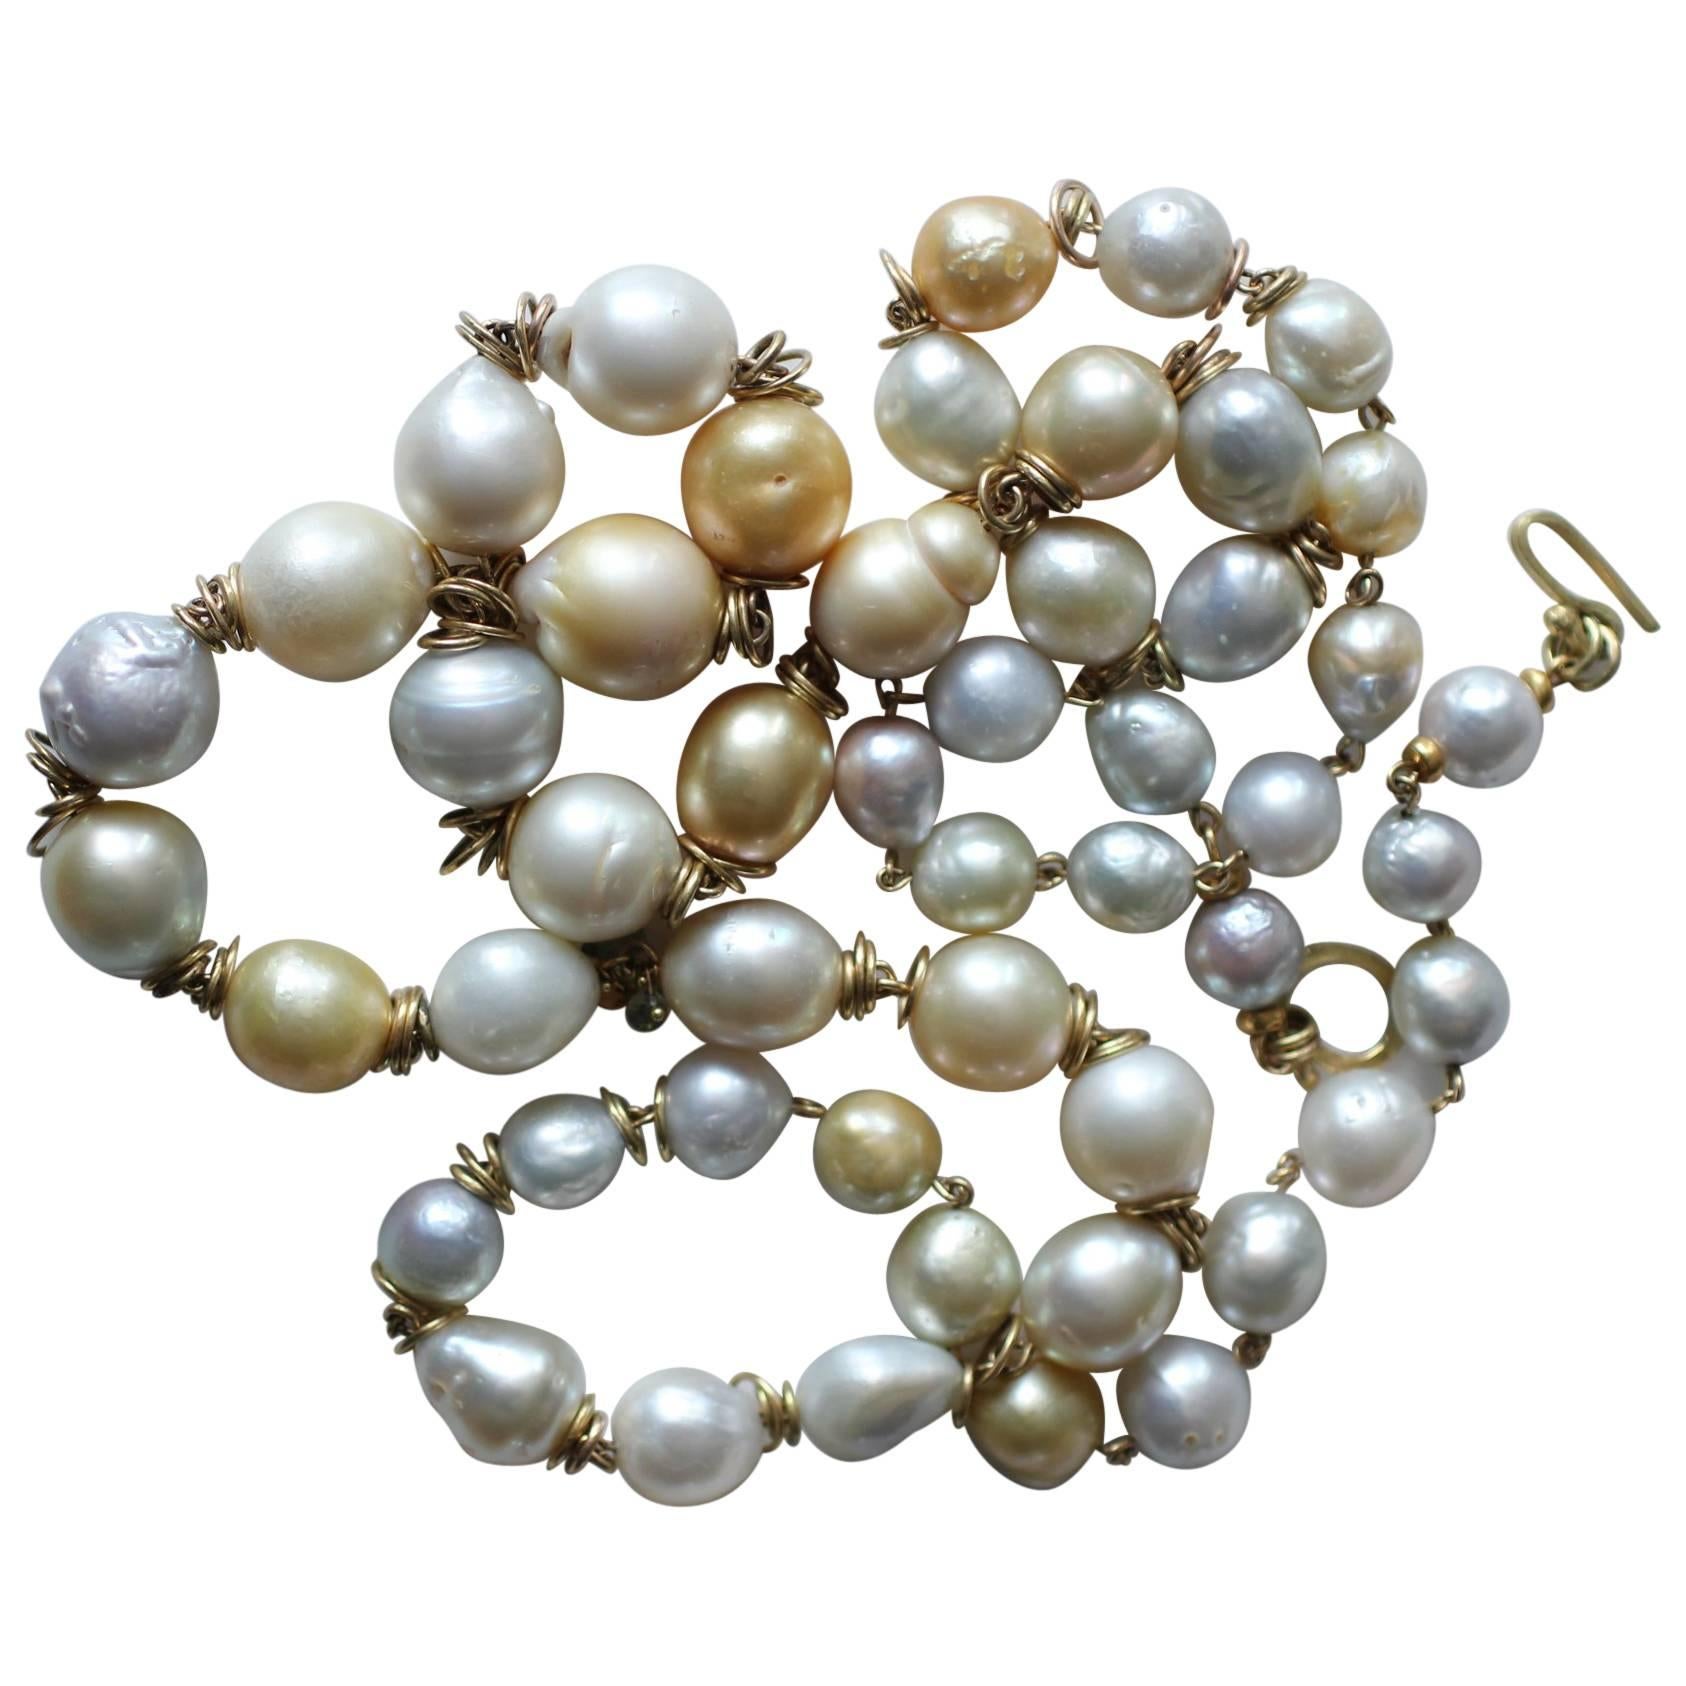 South Sea Pearls 18K Gold Beaded Link Necklace, White and Golden Baroque Pearls